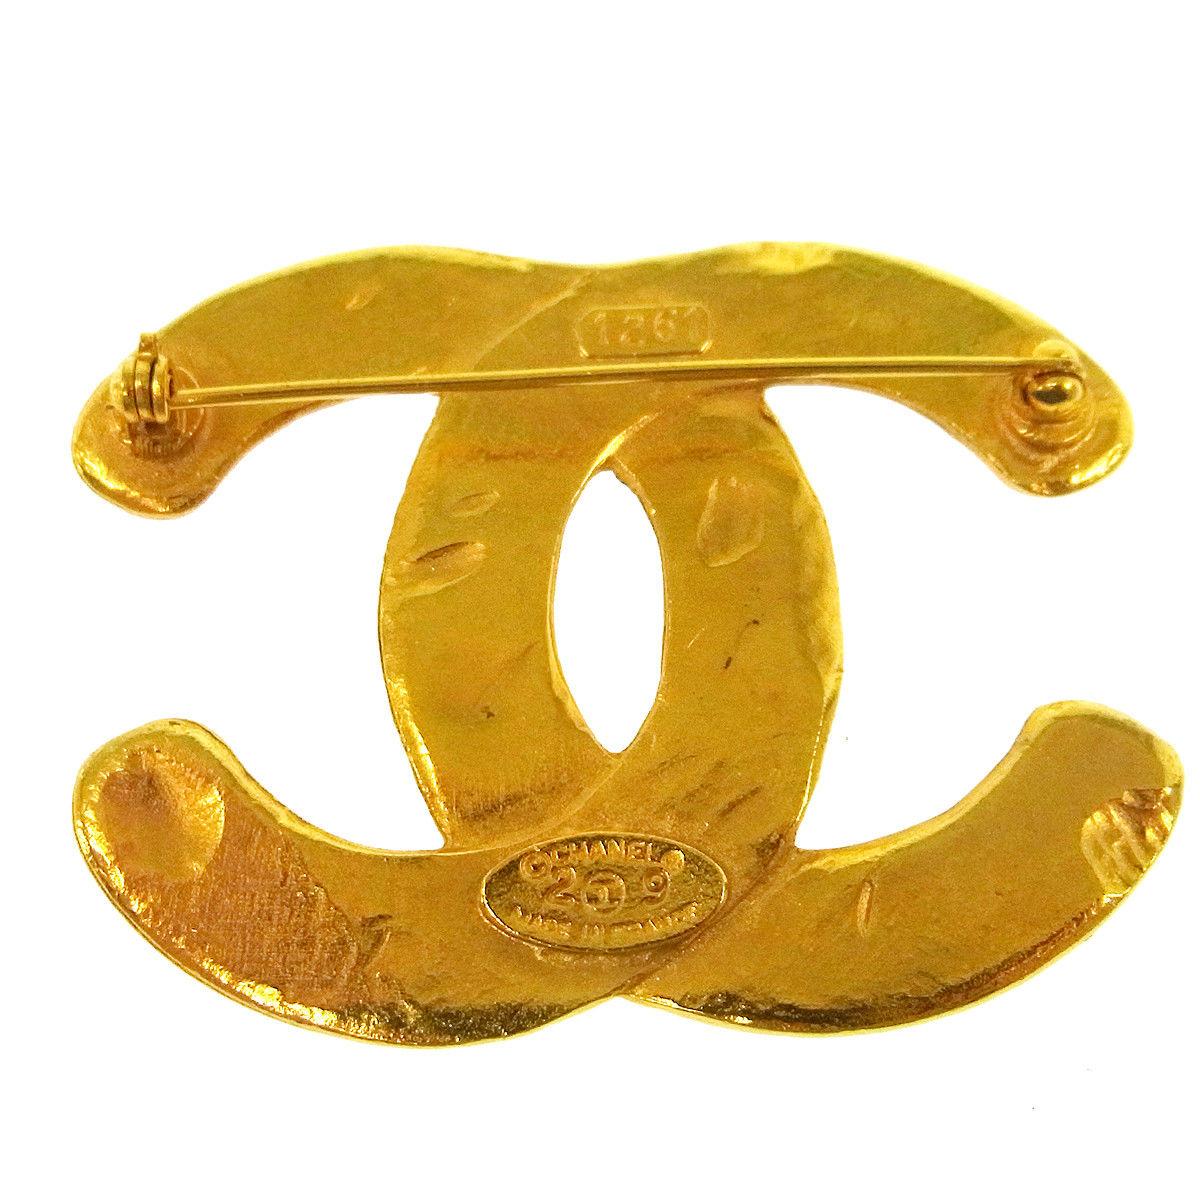 Chanel Gold Textured CC Charm Pin Lapel Brooch

Metal
Gold tone hardware
Pin closure
Made in France
Measures 2.25